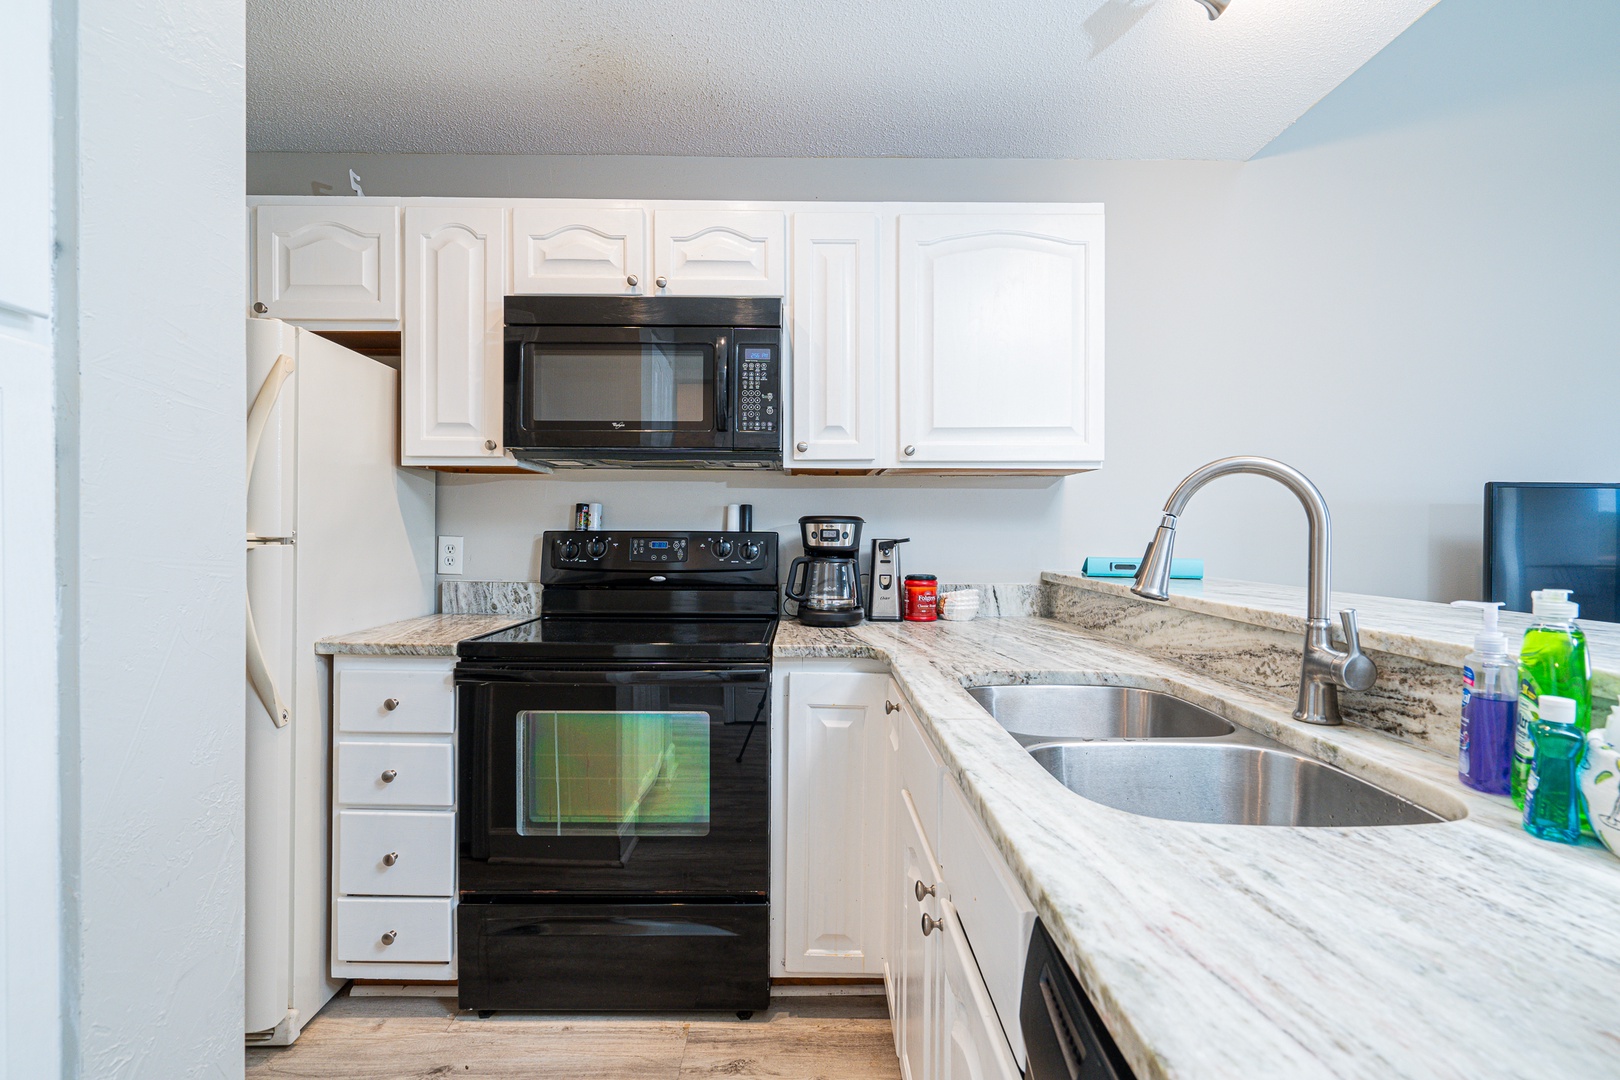 The inviting kitchen offers loads of space & all the comforts of home